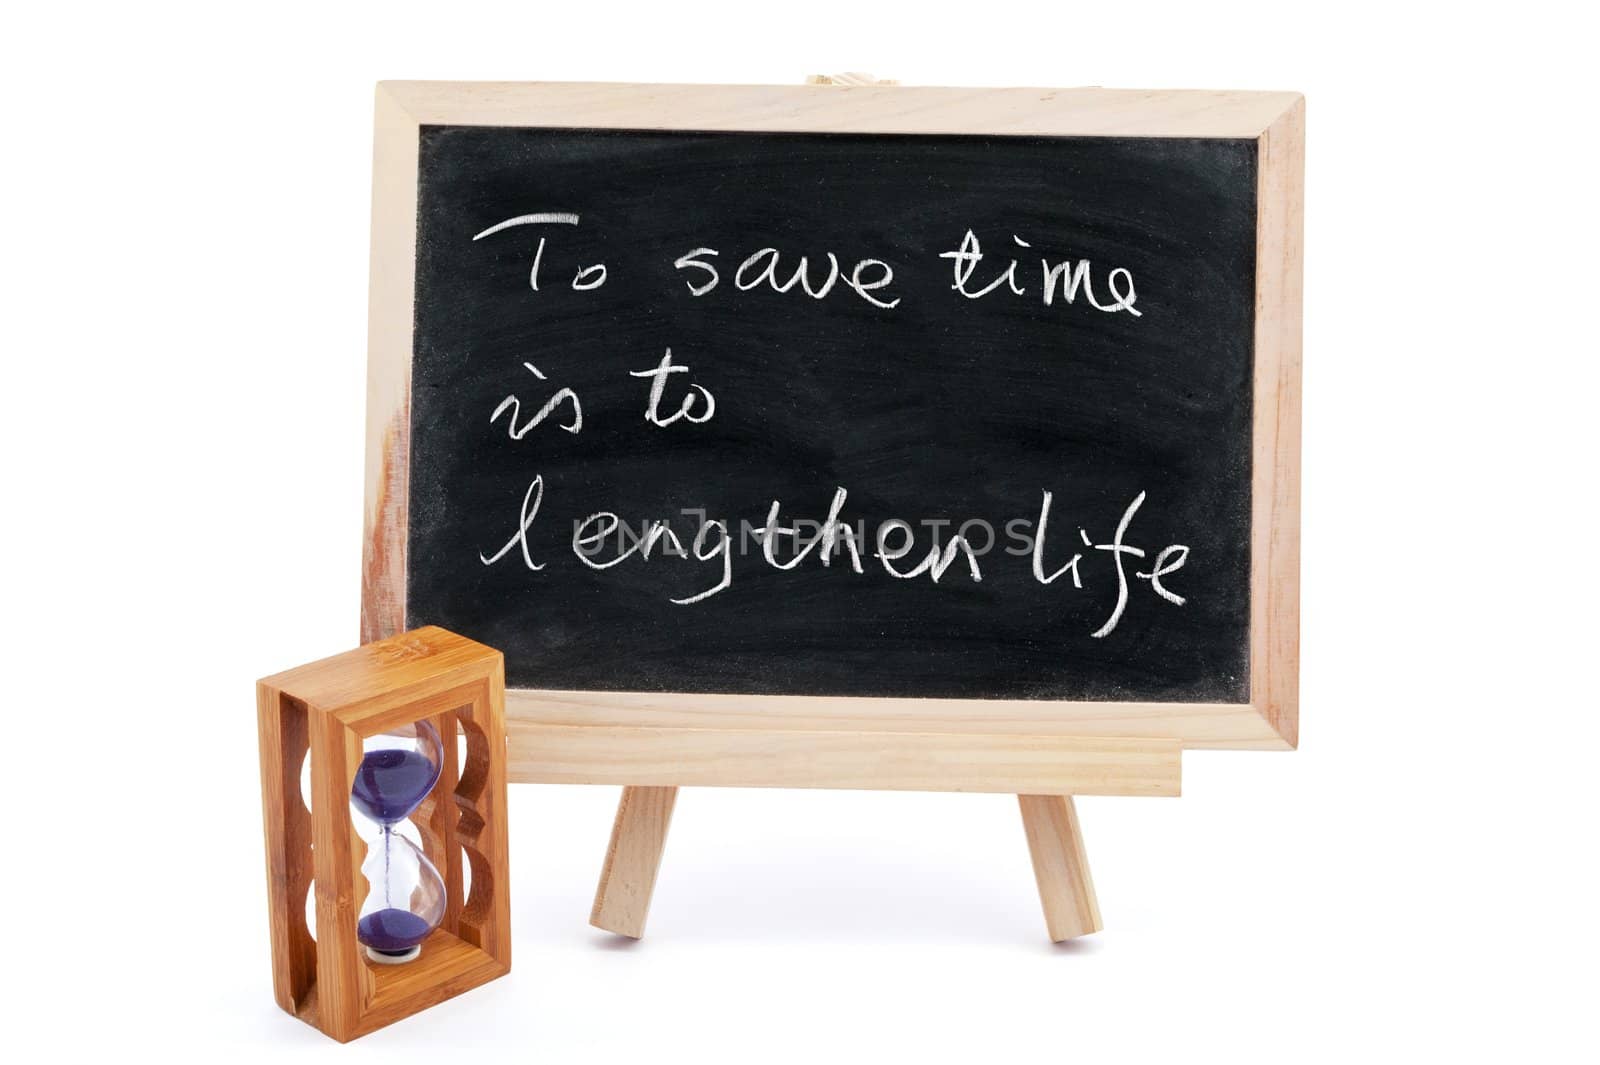 "To save time is to lengthen life" saying written on blackboard